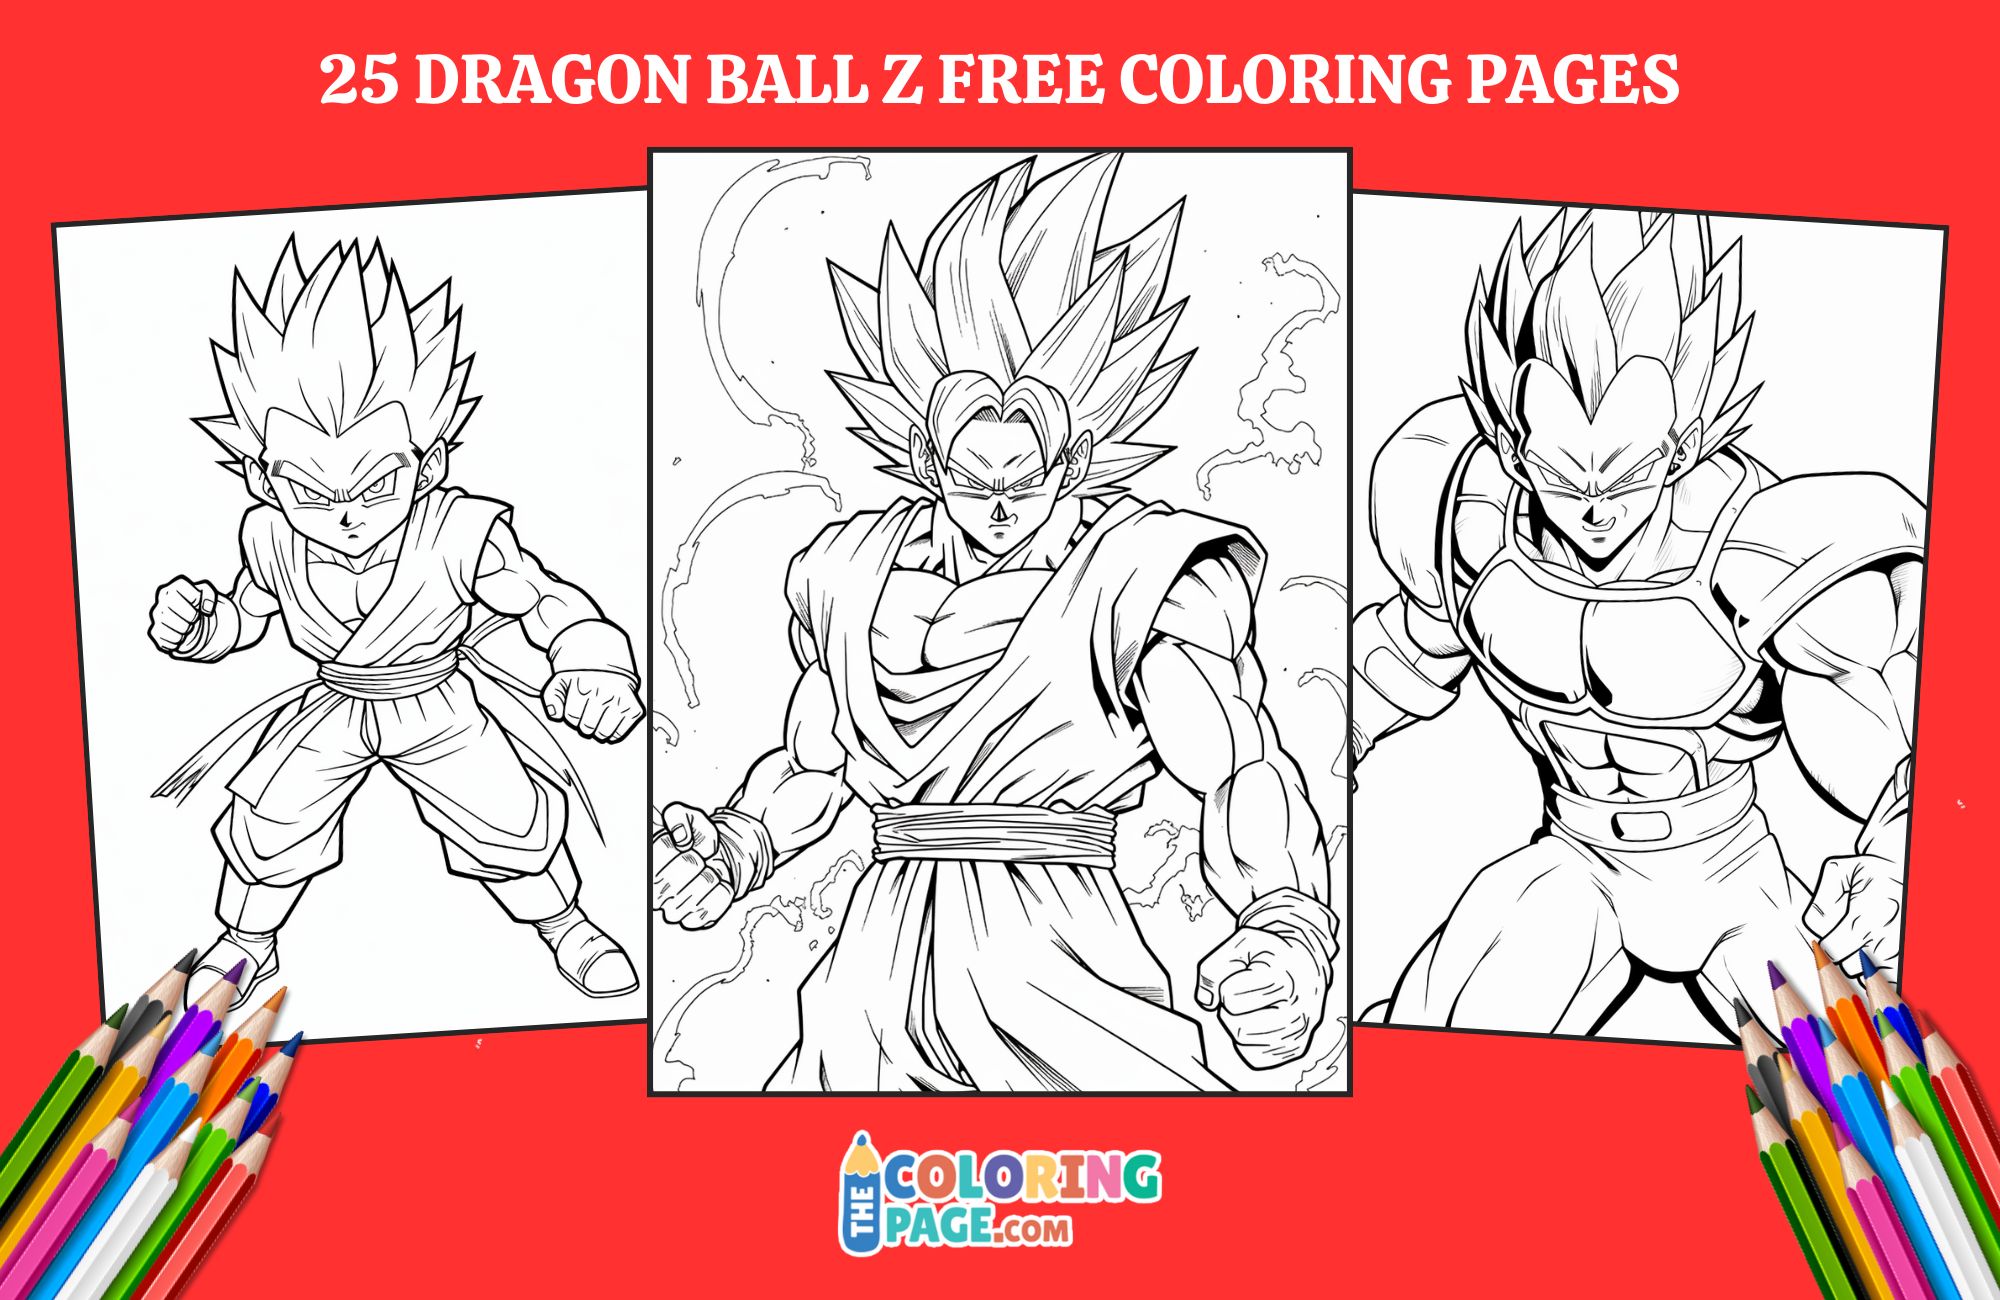 25 Dragon ball Z Coloring Pages for kids